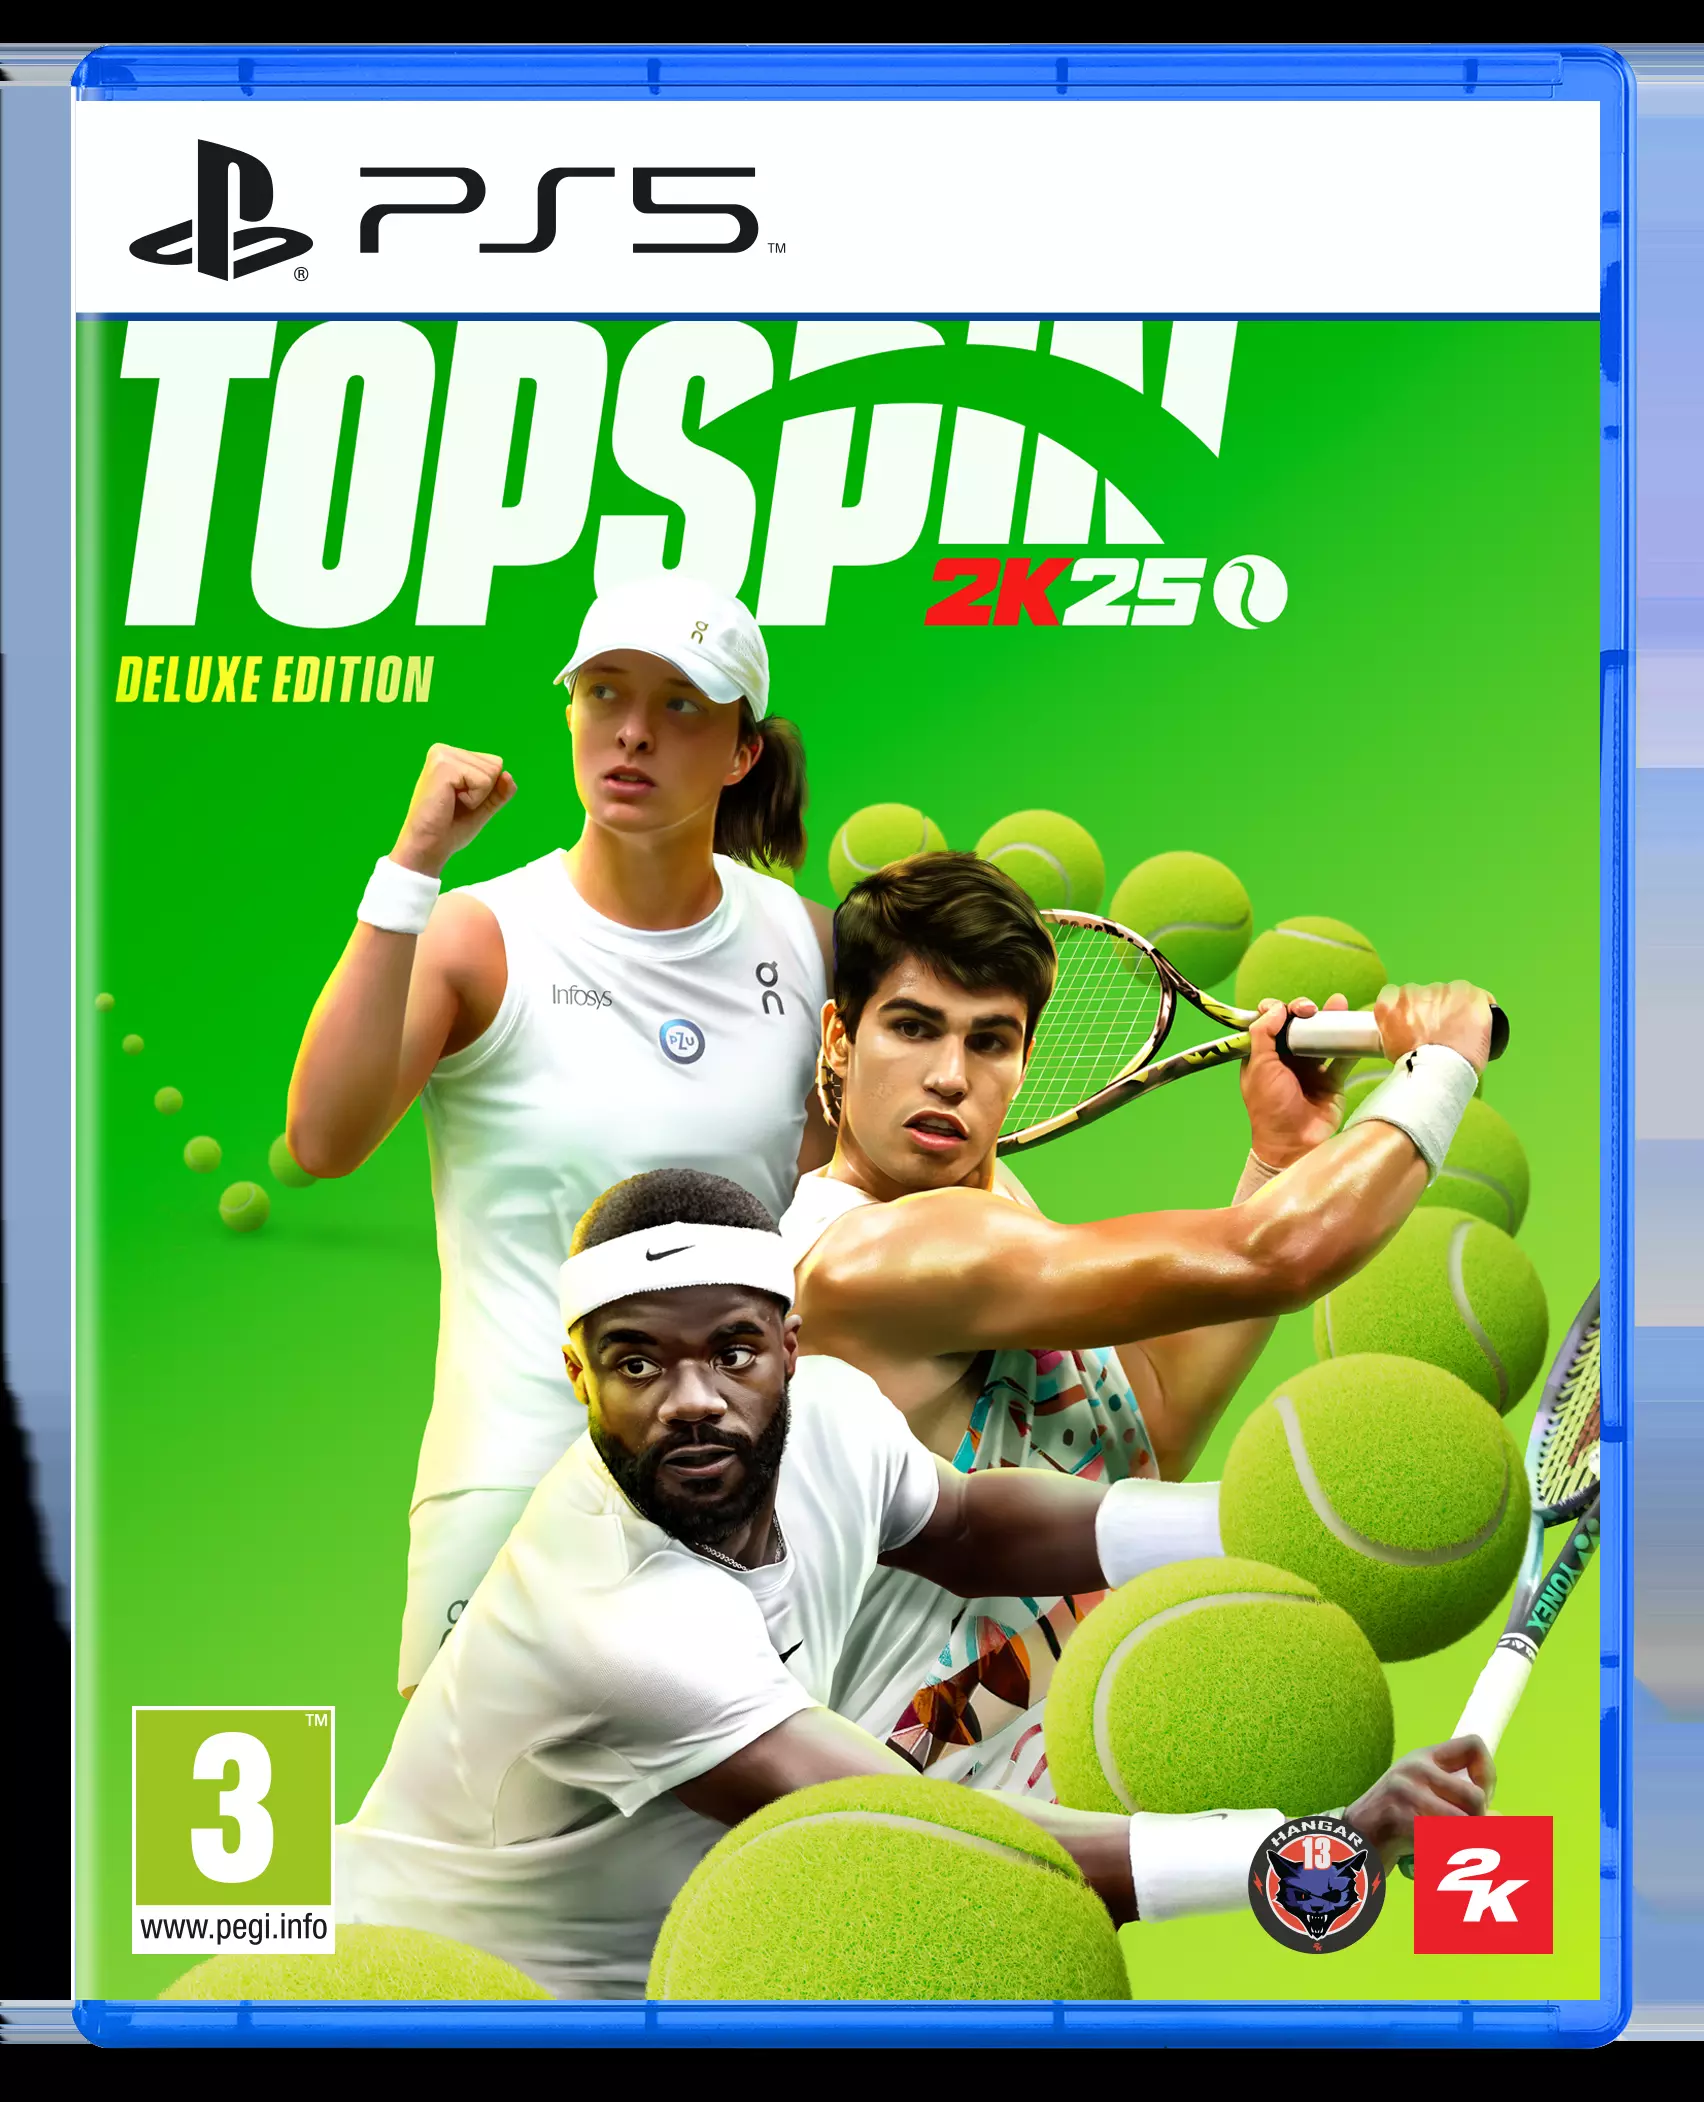 Topspin 2K25 Deluxe Edition